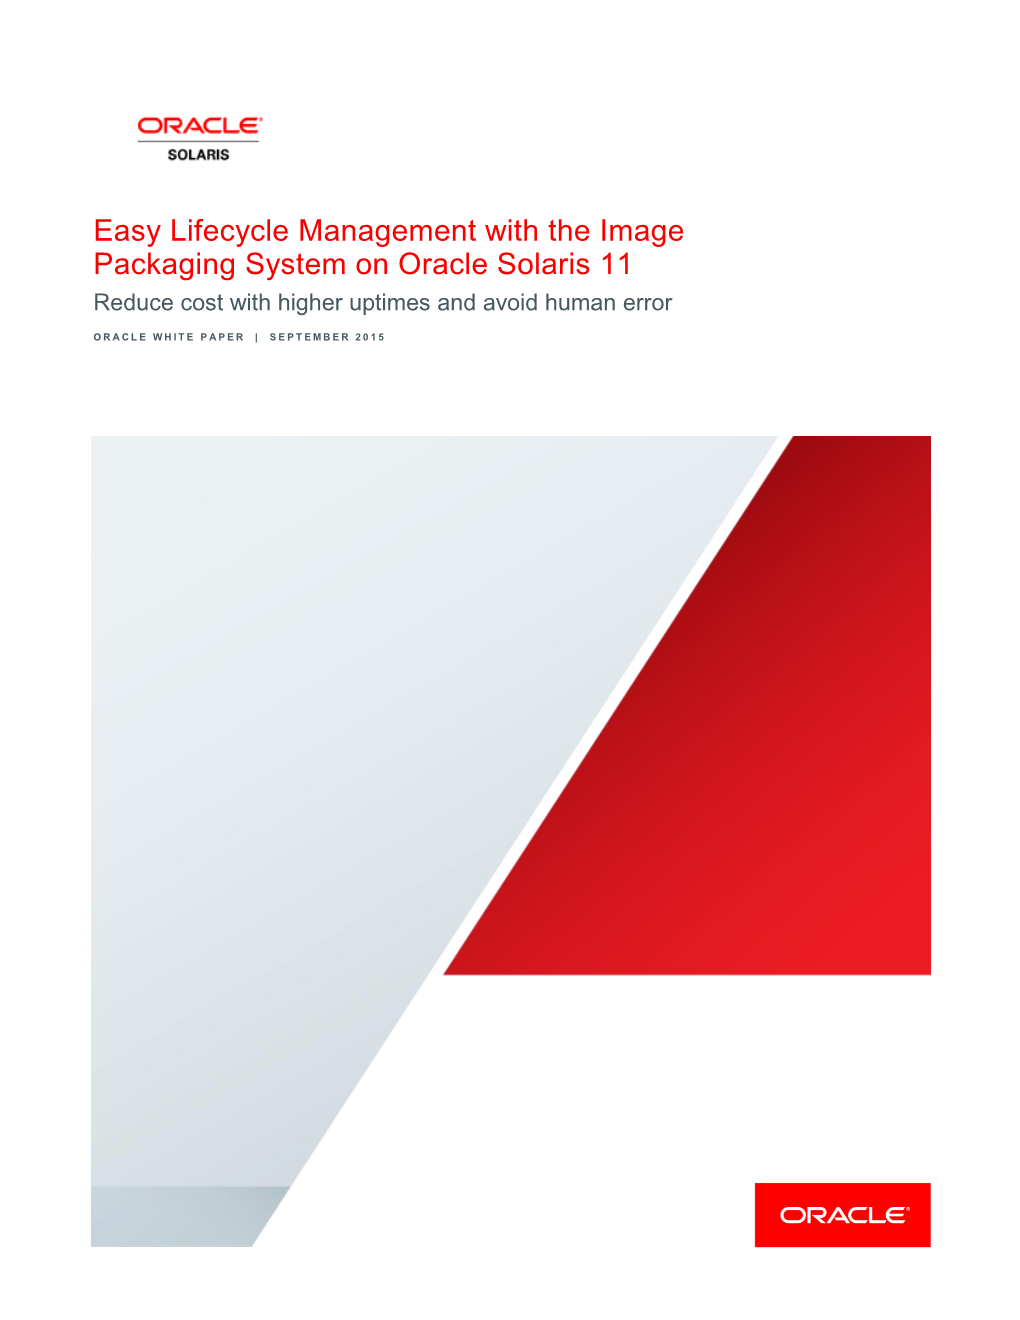 Easy Lifecycle Management with the Image Packaging System on Oracle Solaris 11 Reduce Cost with Higher Uptimes and Avoid Human Error